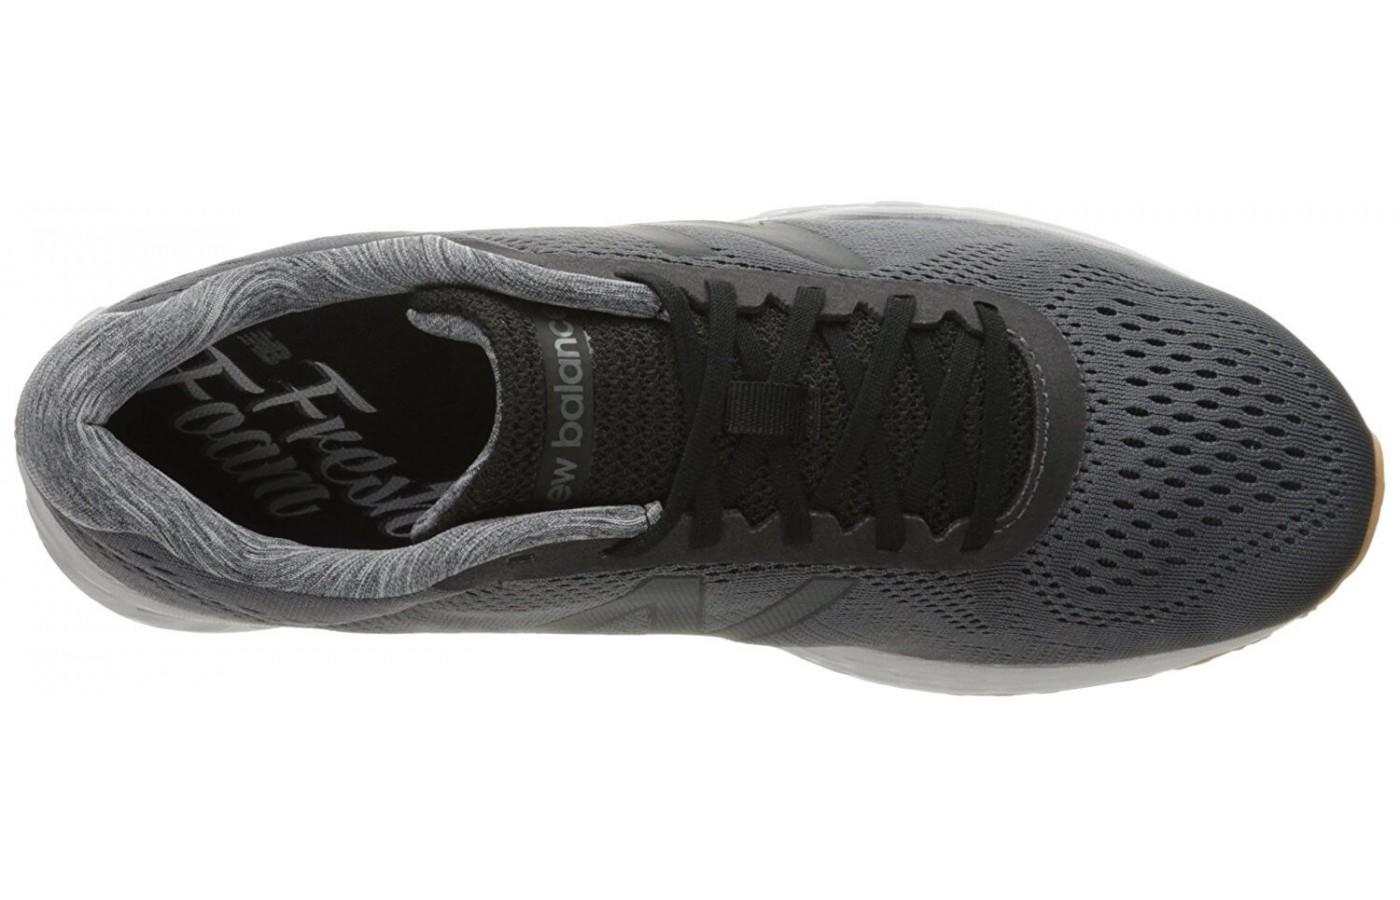 The upper features a breathable mesh. 